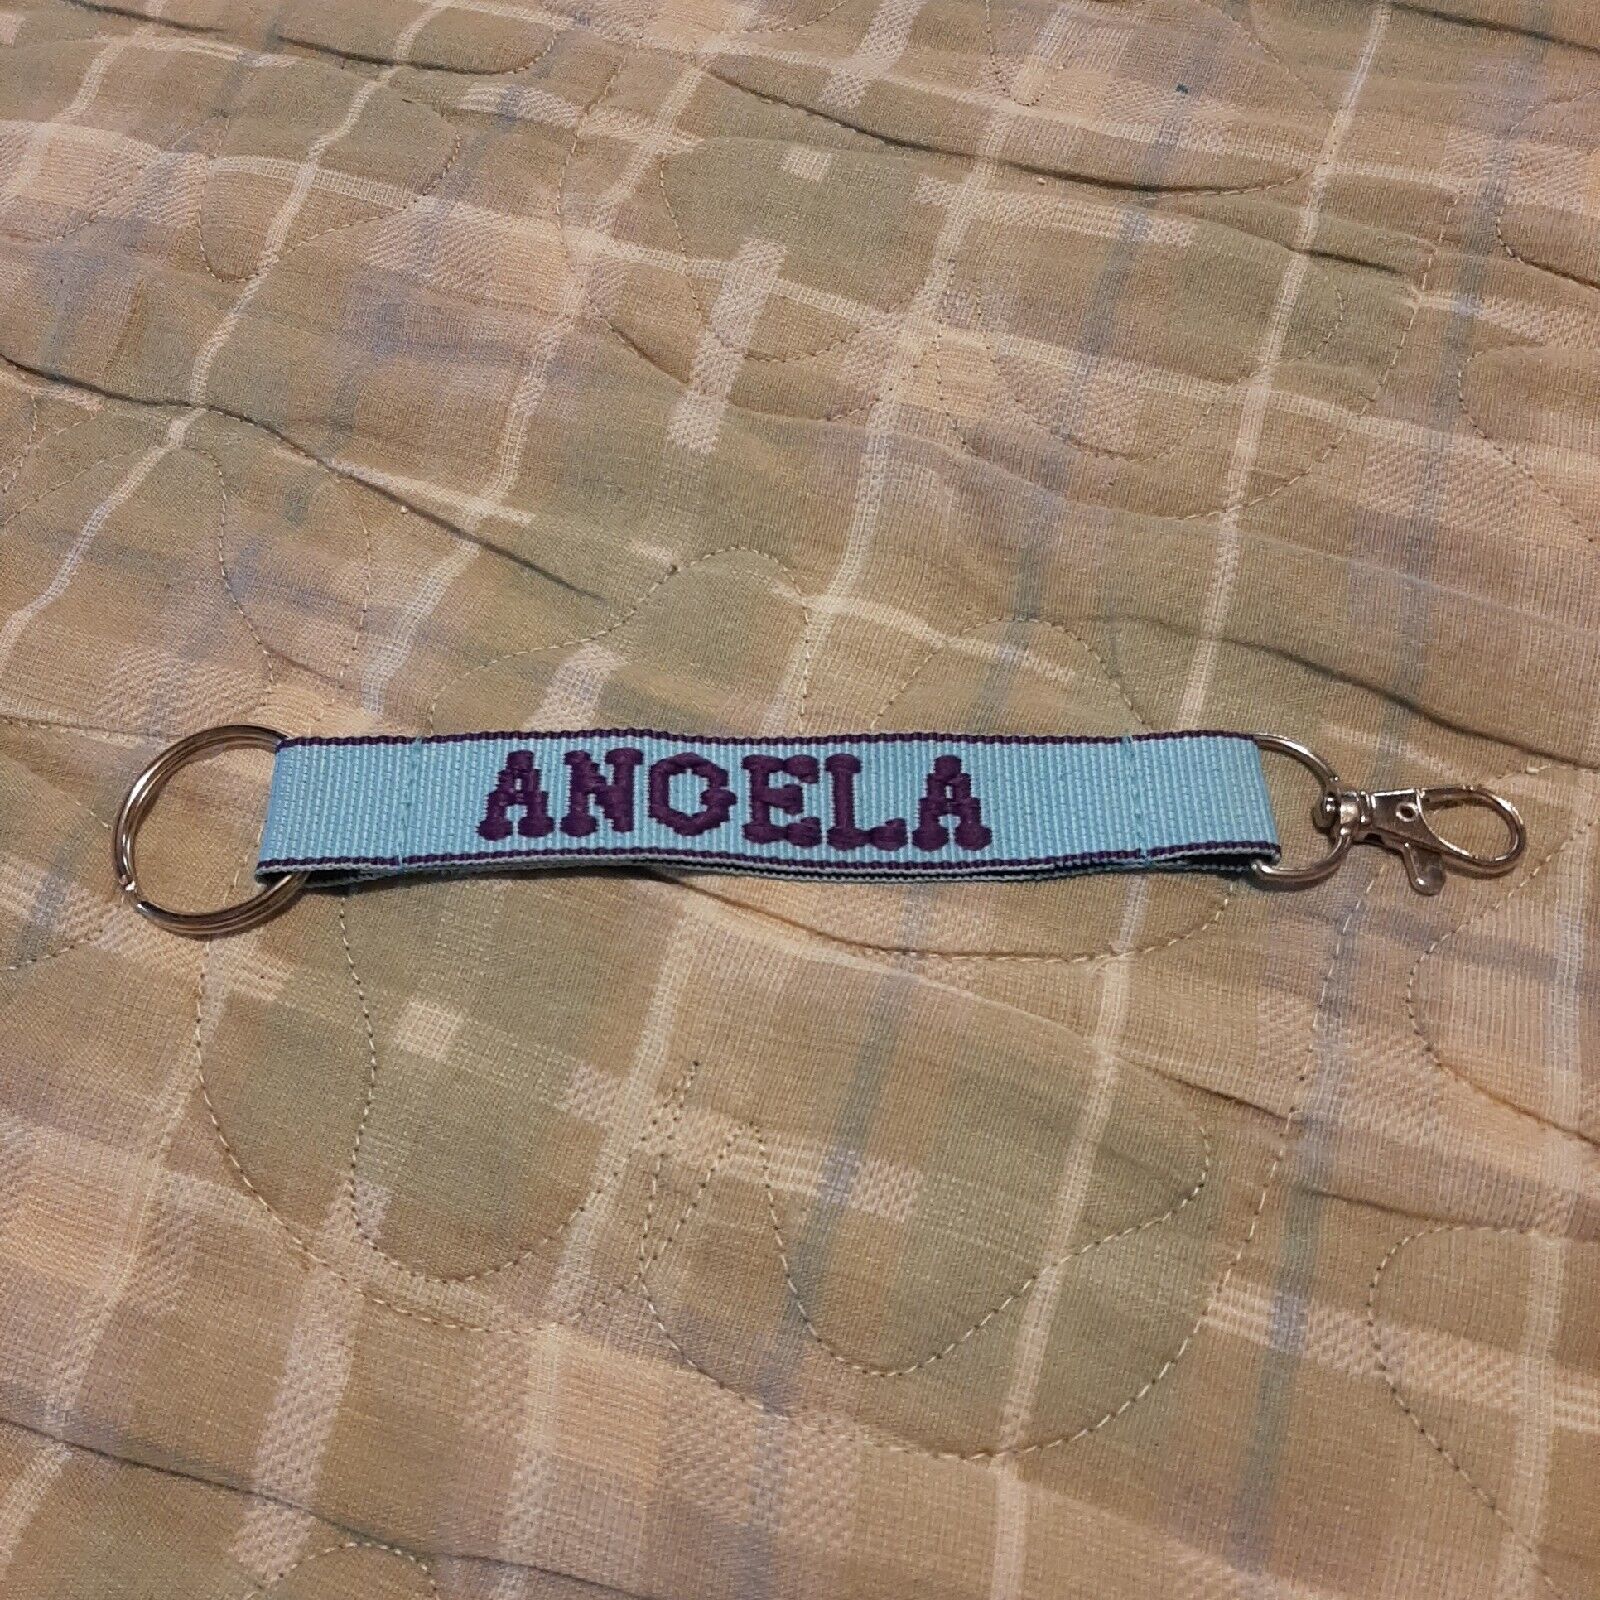 ANGELA Embroidered Name Strap Key Ring, Keychain with Clasp (LT. BLUE & PURPLE)